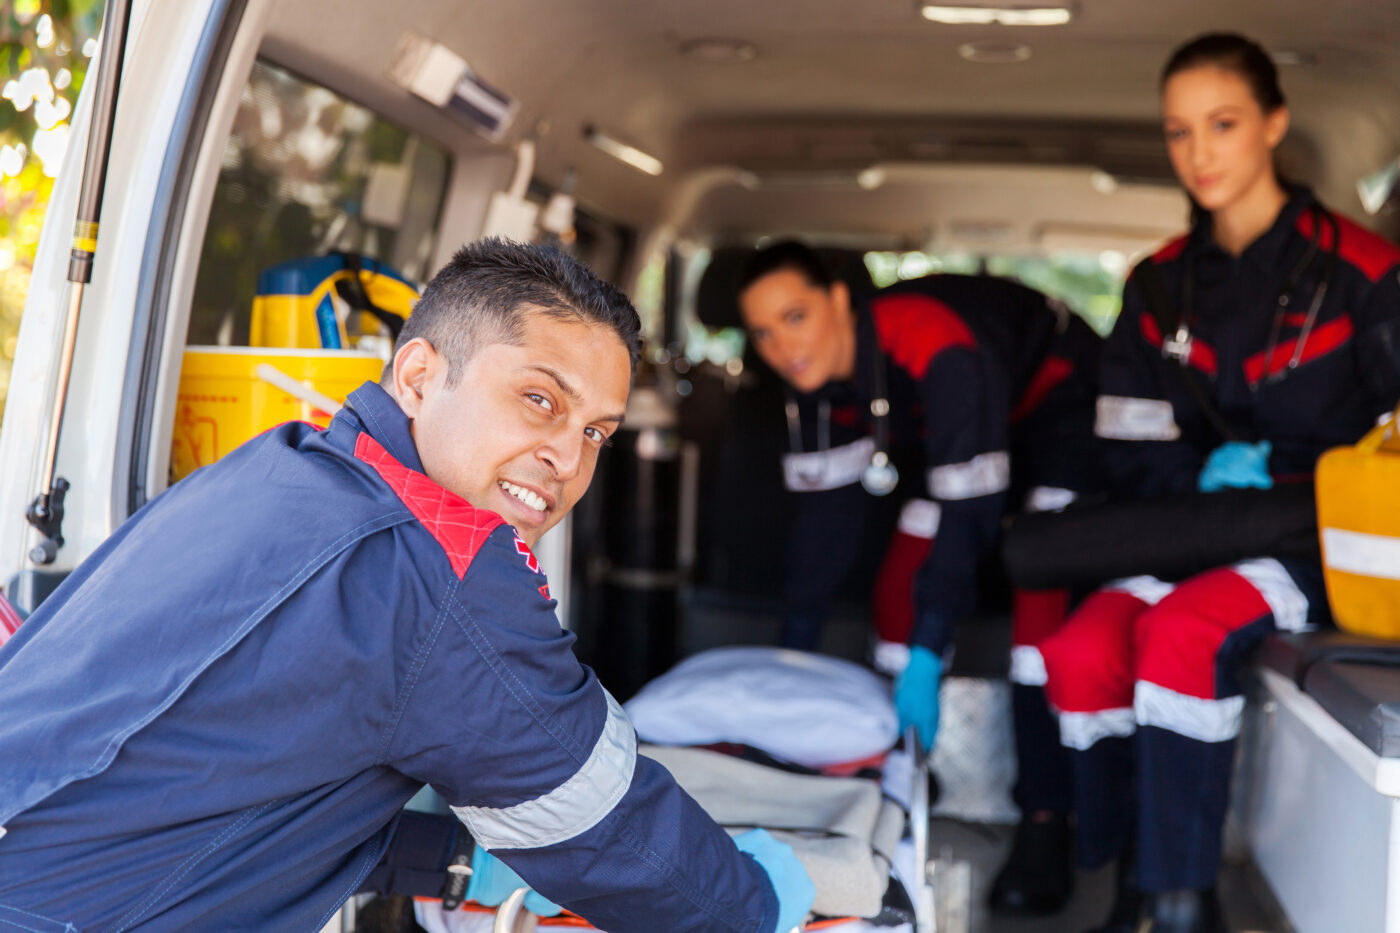 How to Become an EMT: Training, Licensing, and Certification Requirements